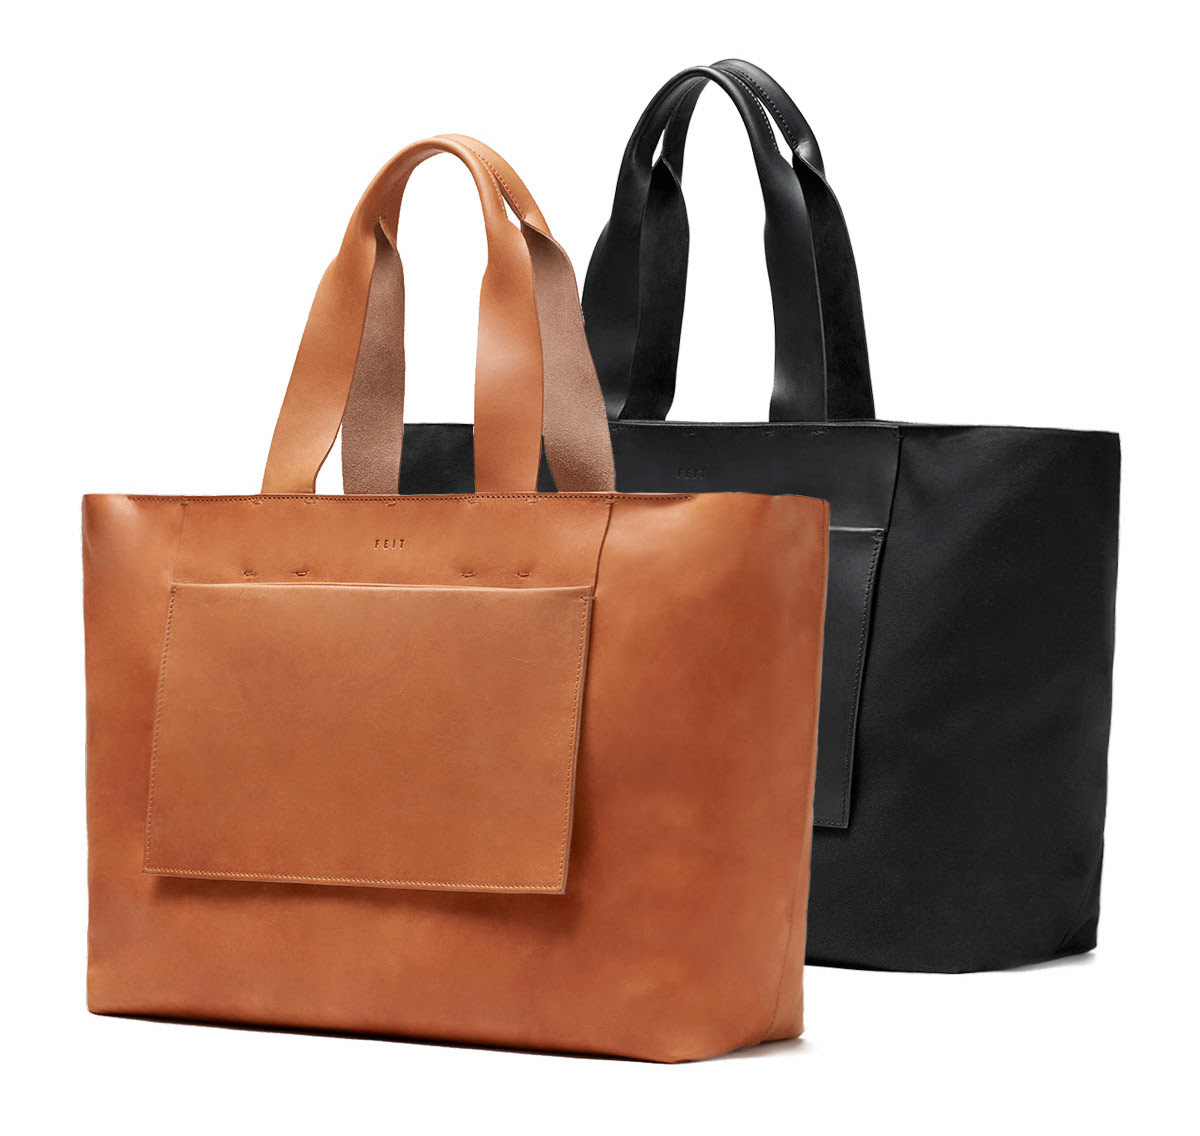 Feit Tote Bags